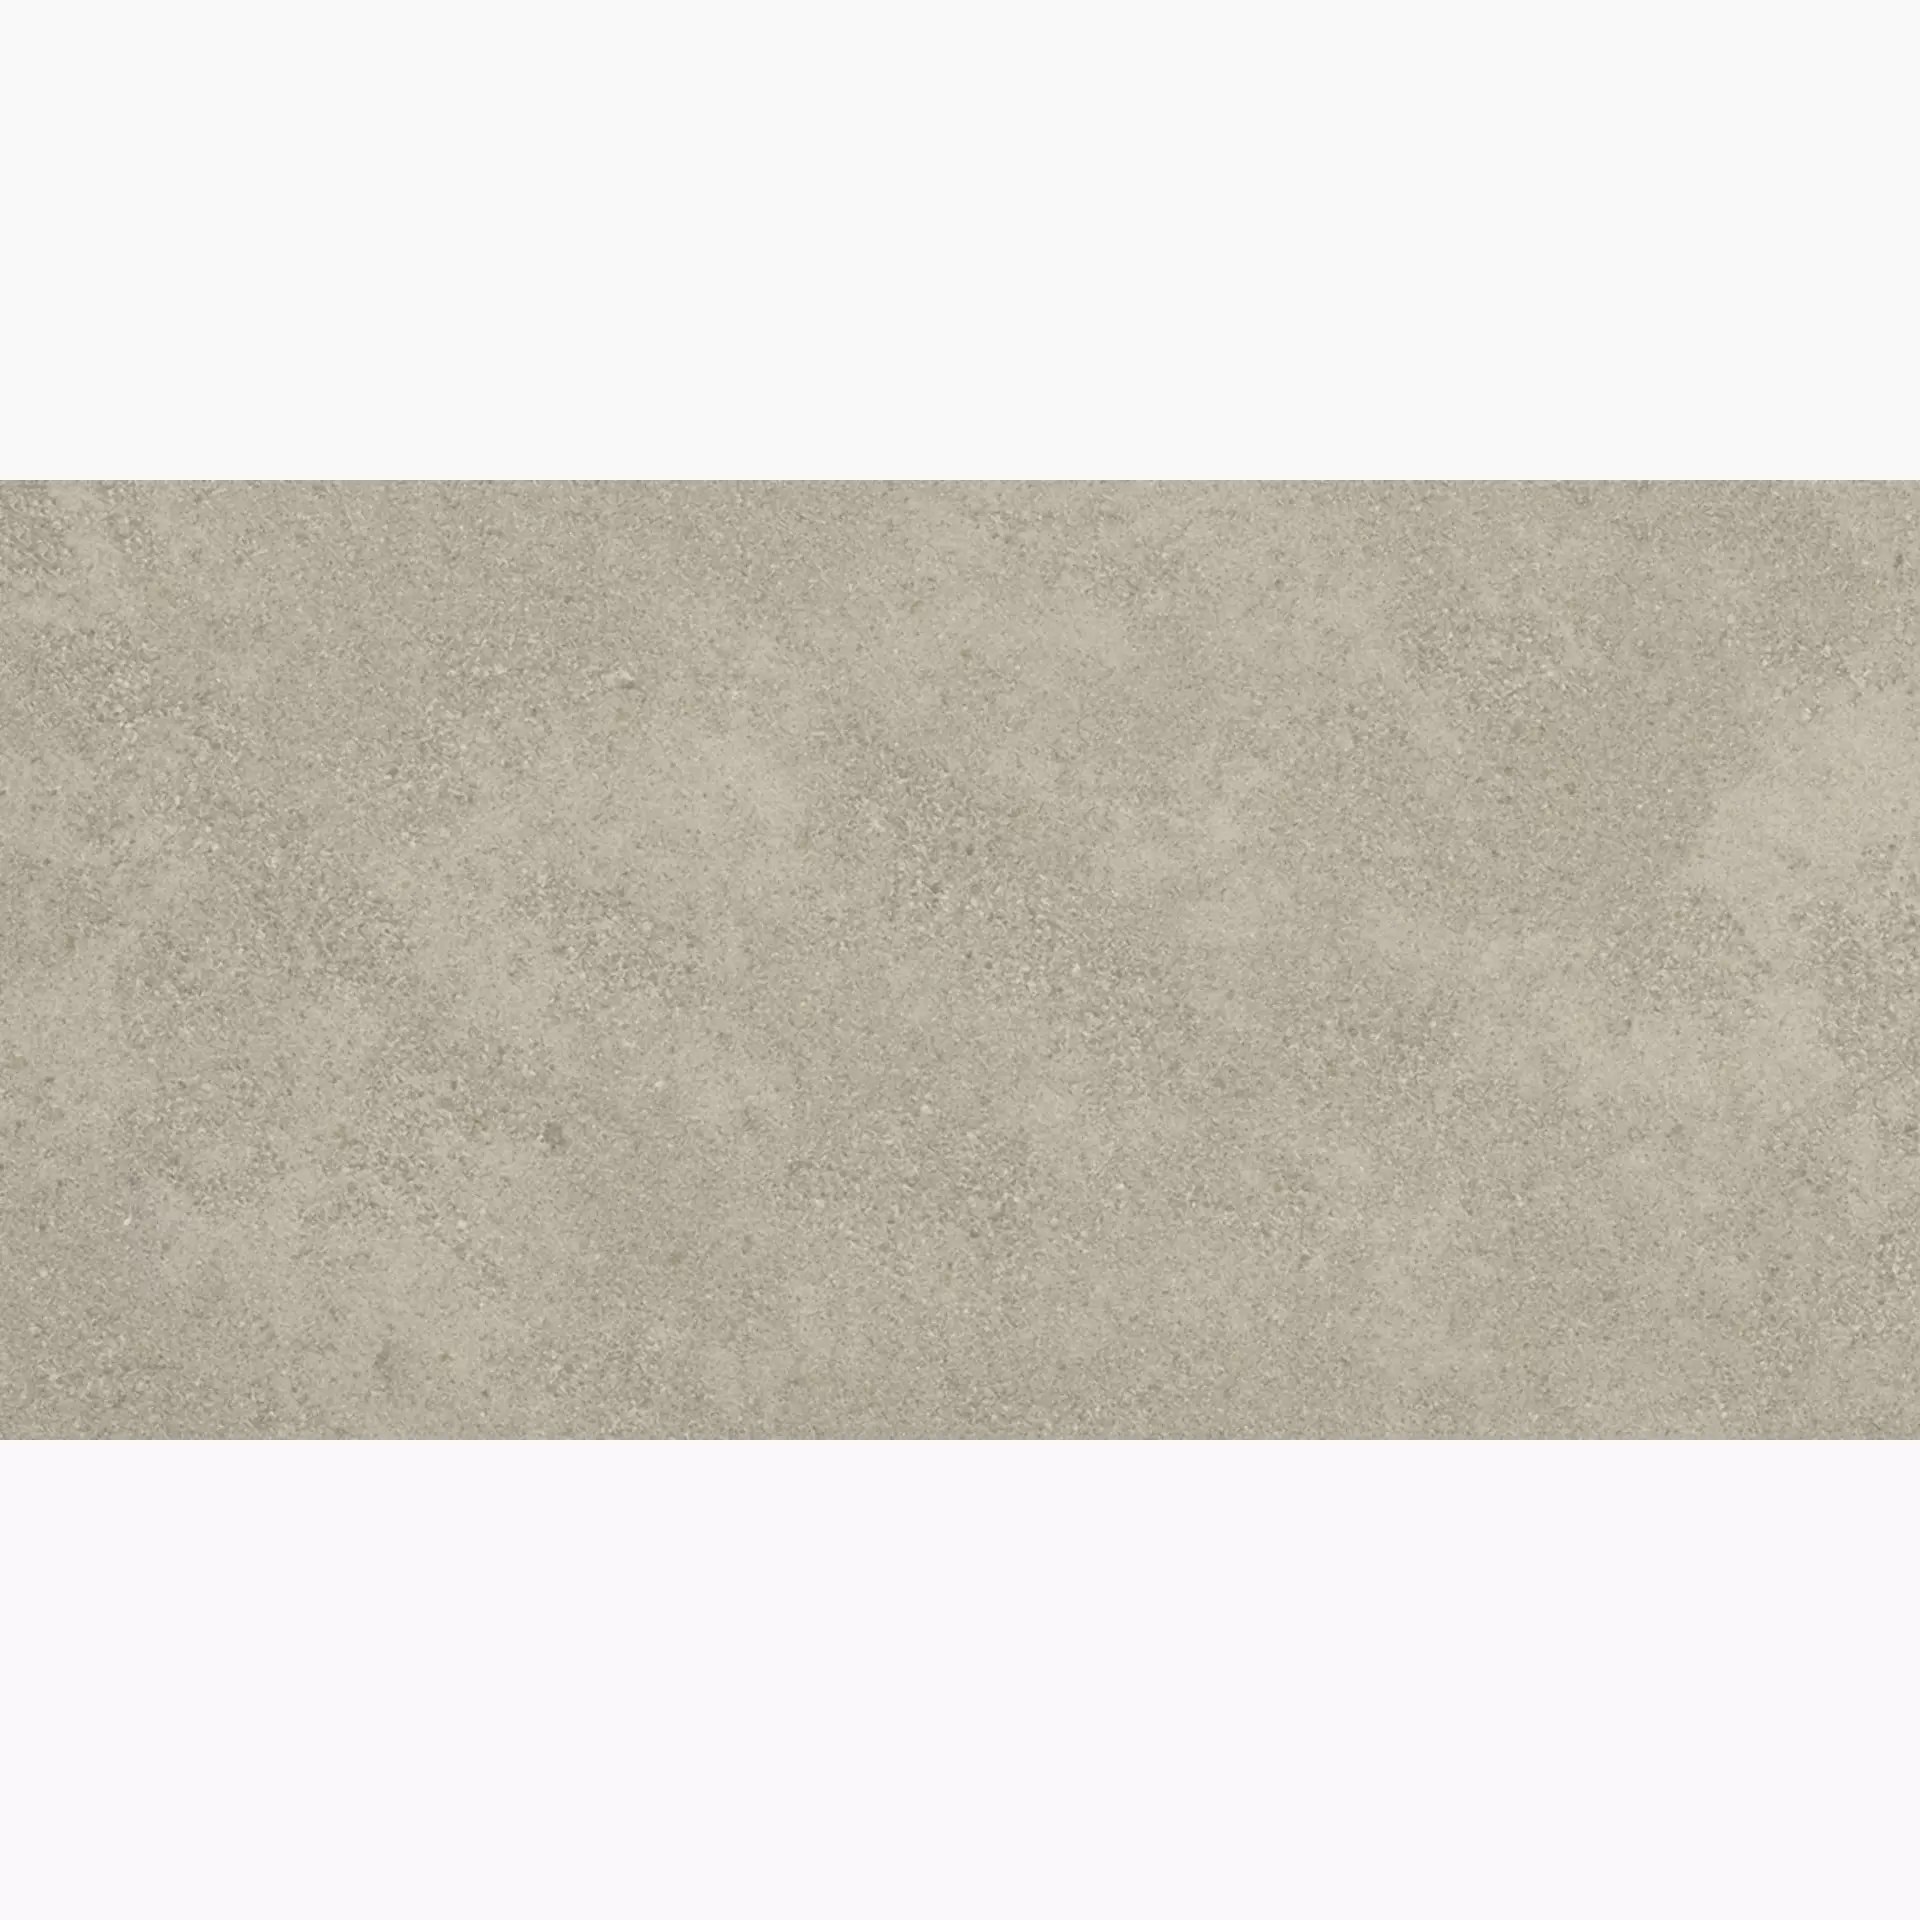 FMG Pietre Trax Greige Naturale P62386 60x120cm rectified 10mm